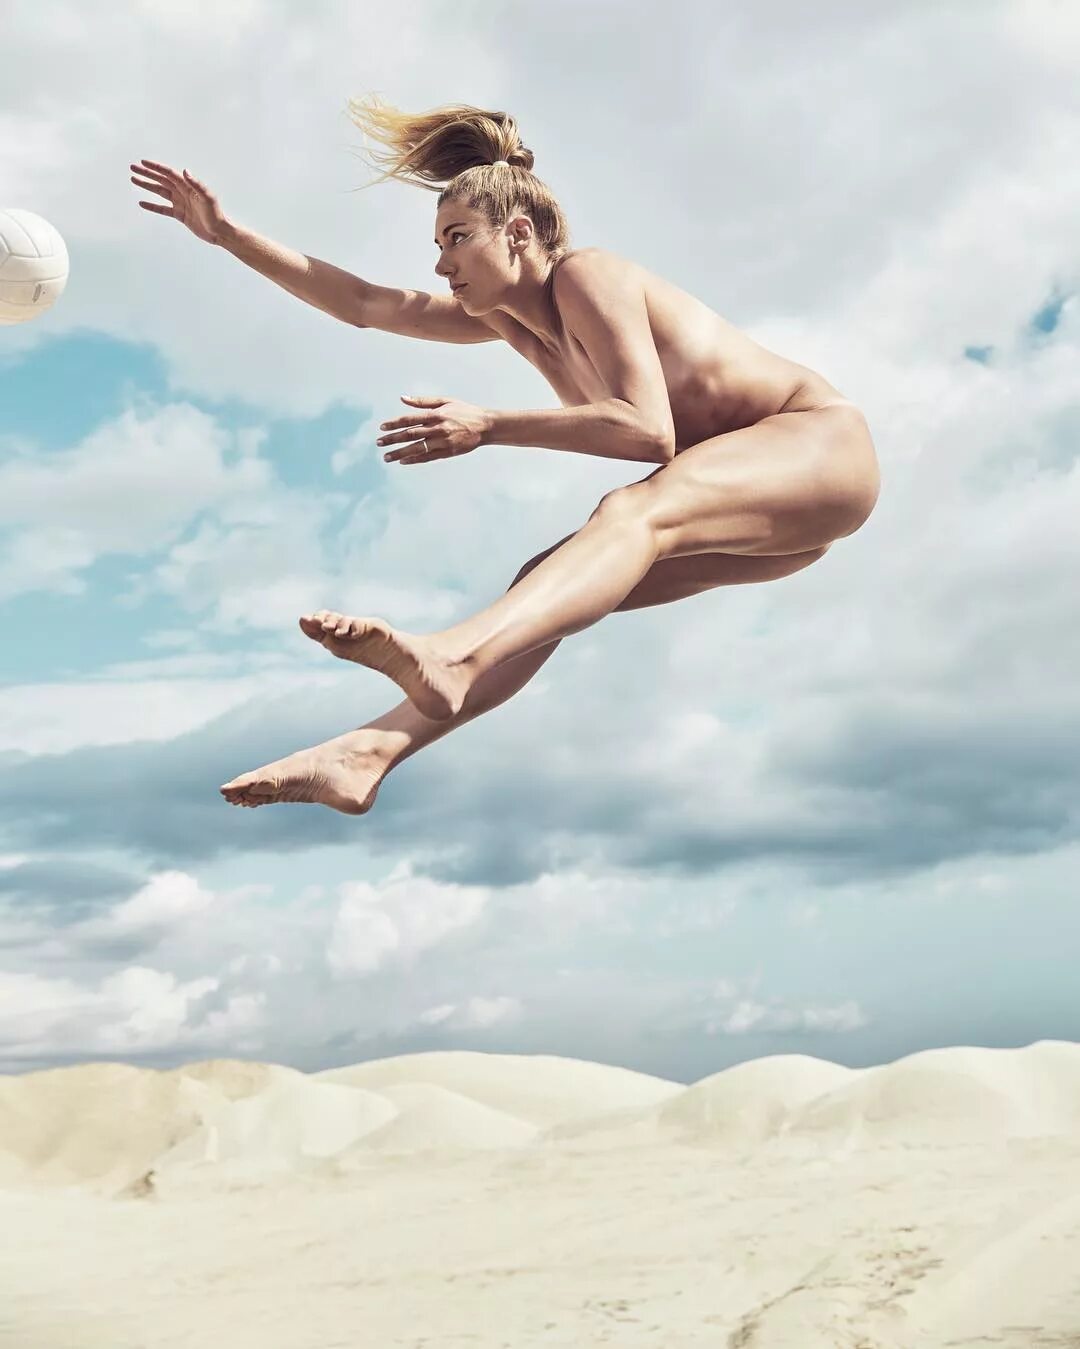 April Ross on Instagram: "The first time I saw ESPN's Body Issue ...